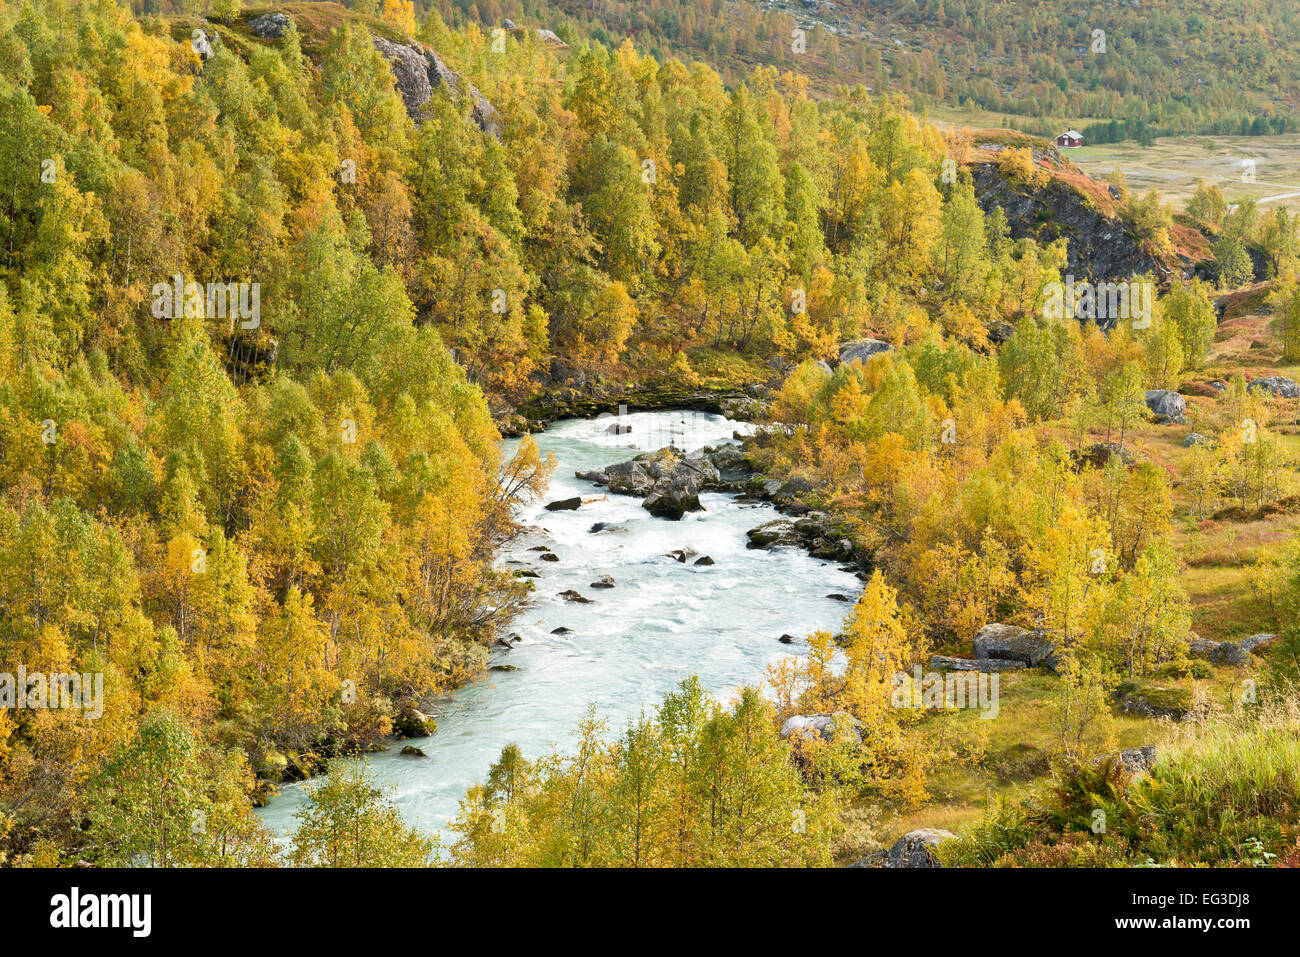 Austerdalen, valley shaped from glacier Austerdalsbre, tongue of  Jostedalsbre, autum, birch trees, indian summer Stock Photo